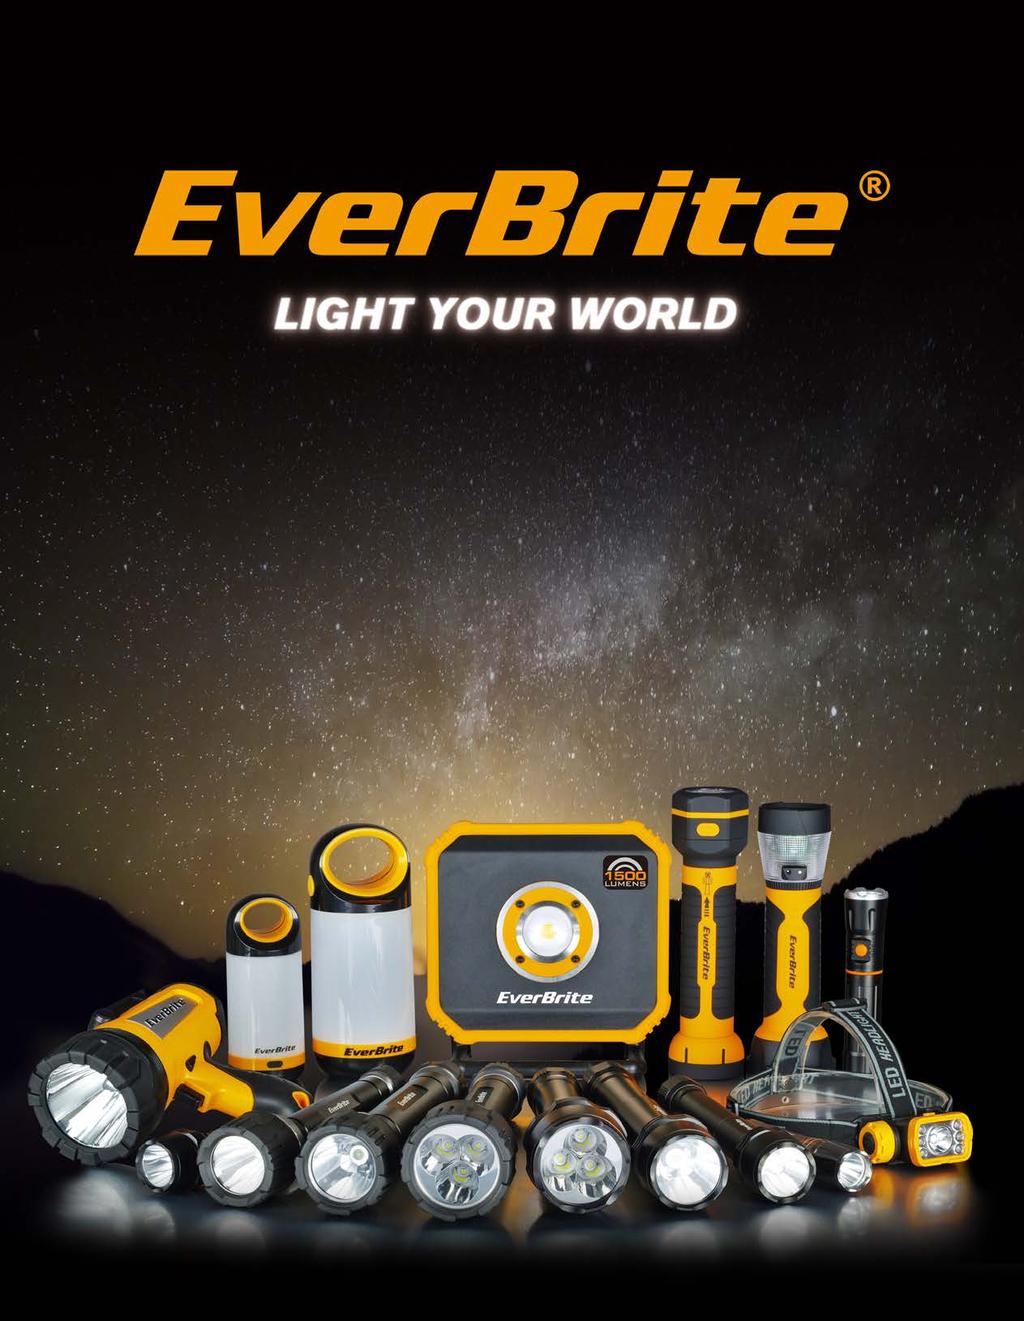 The EverBrite team of engineers and designers work relentlessly to push beyond the limits set by the industry on what handheld and hands-free illumination tools should be.